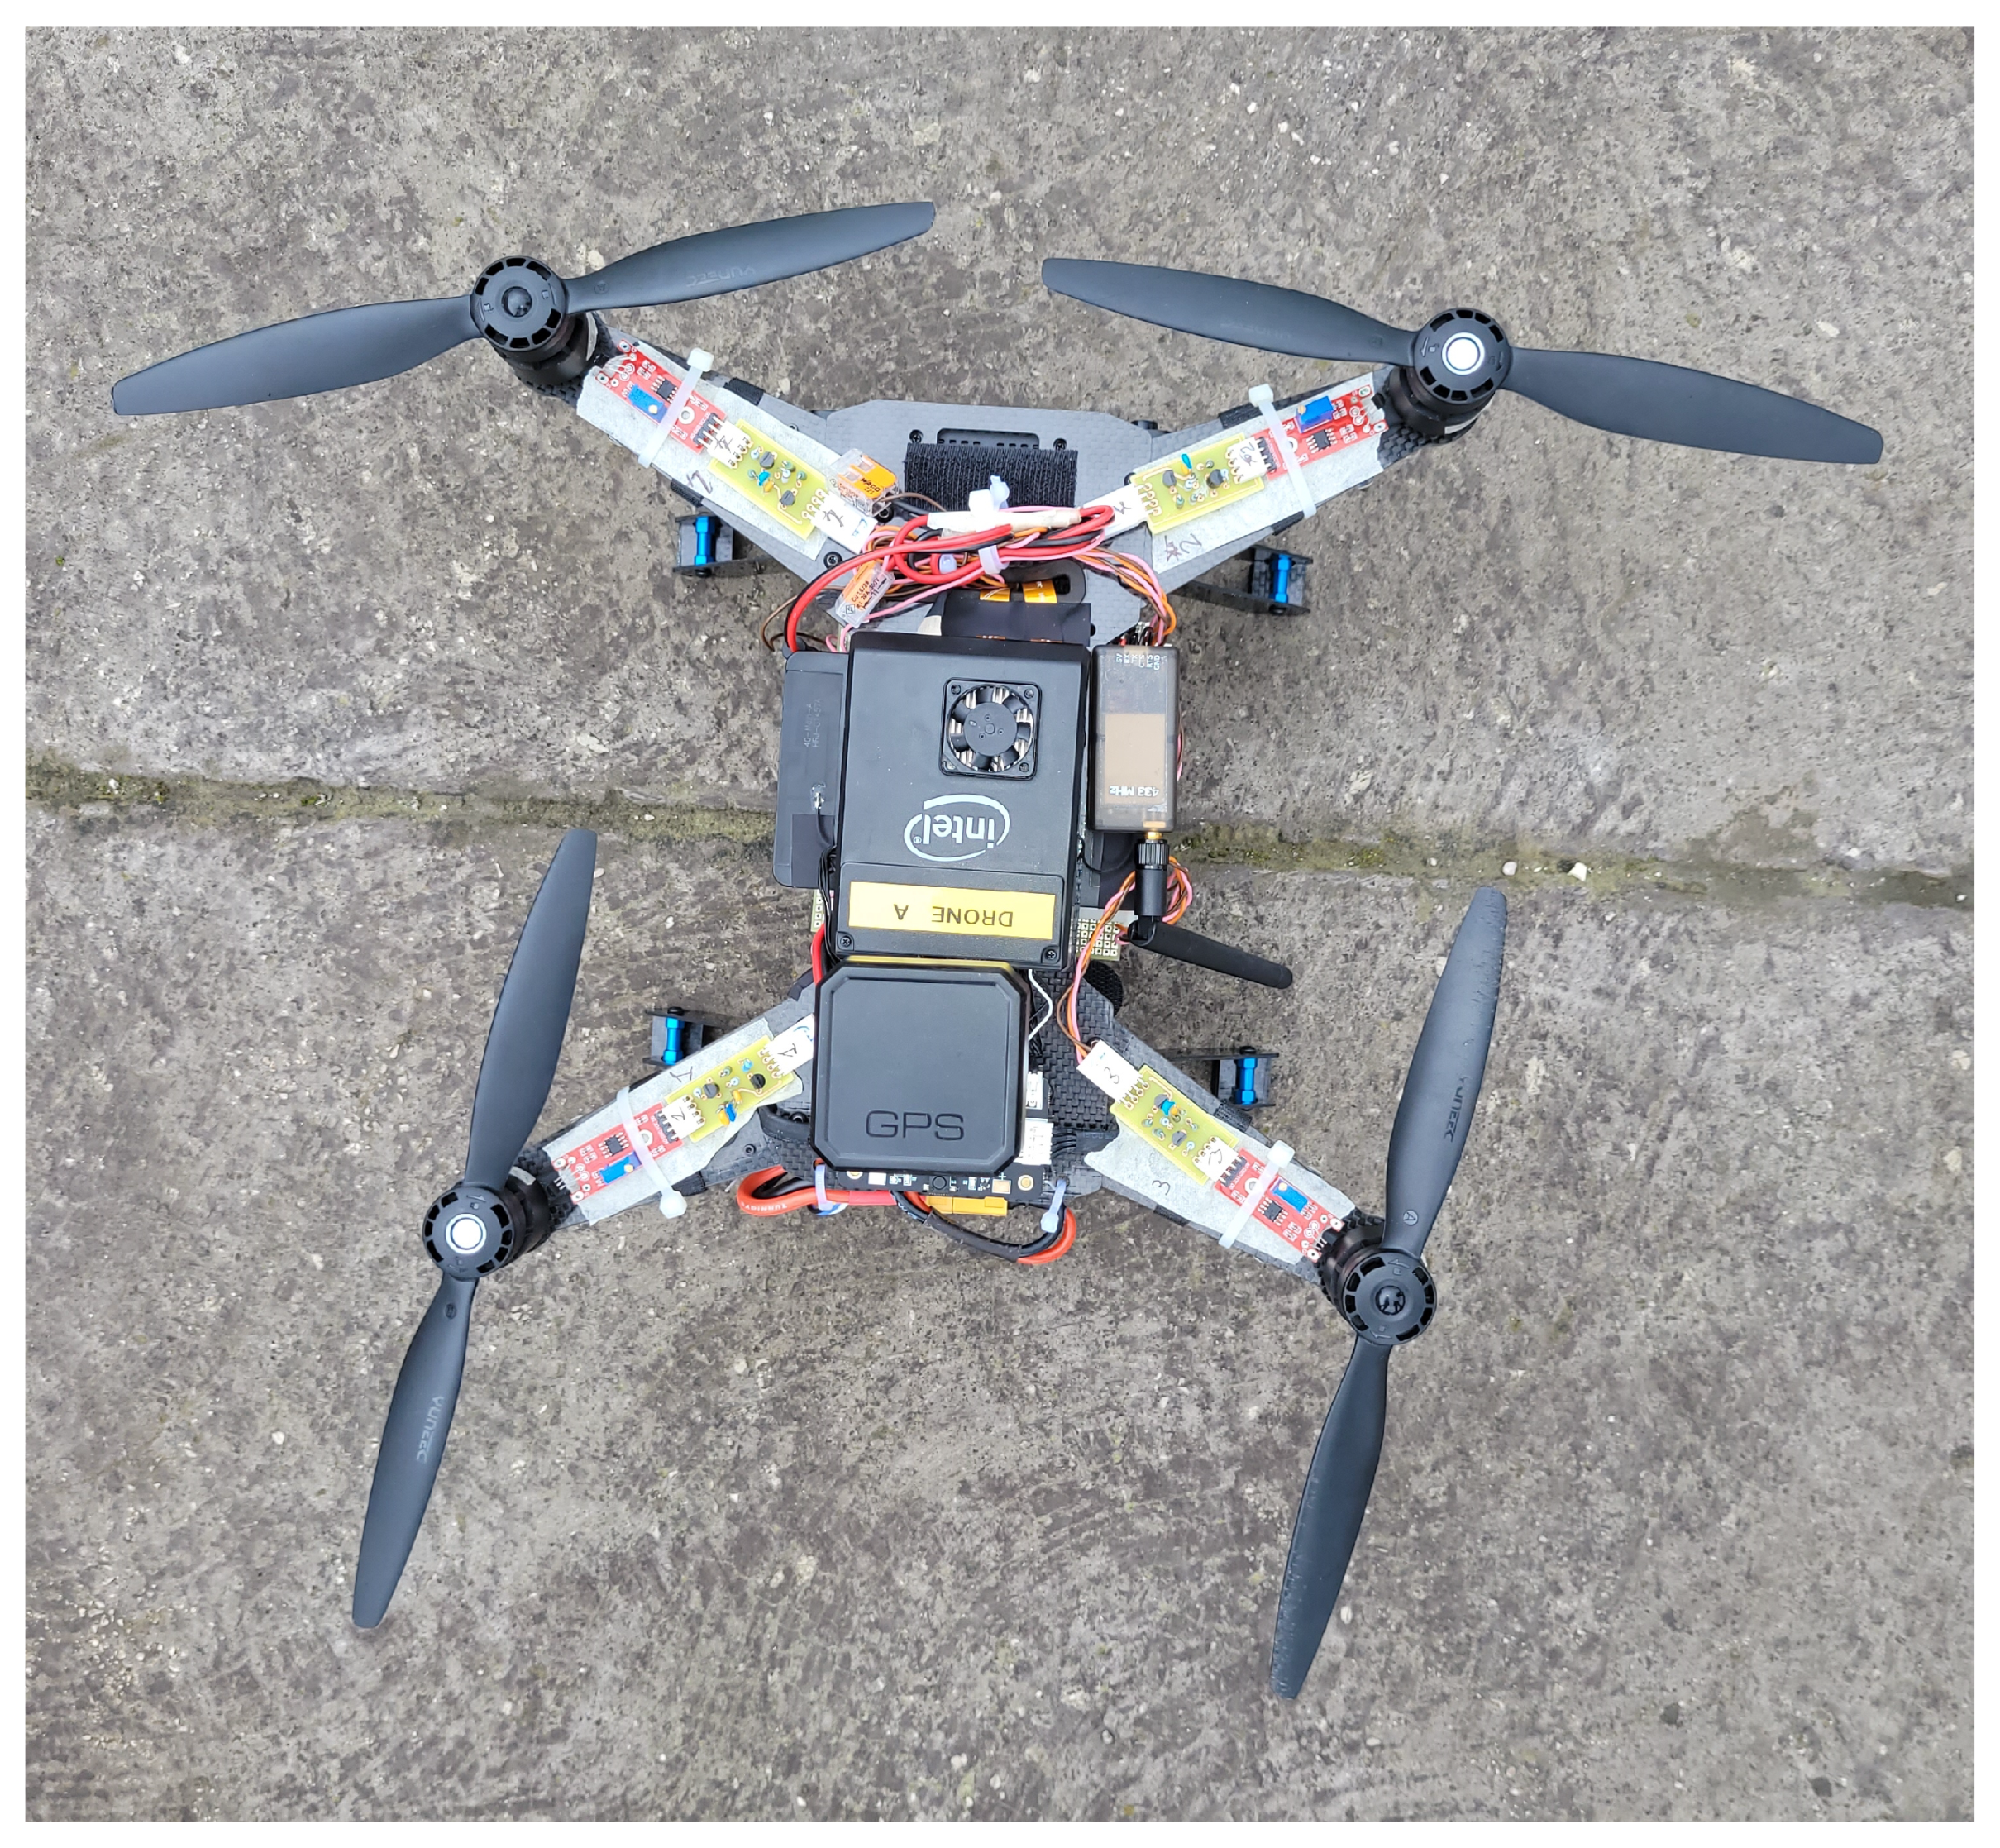 Drones | Free Full-Text | Development and Validation of an Aeropropulsive  and Aeroacoustic Simulation Model of a Quadcopter Drone